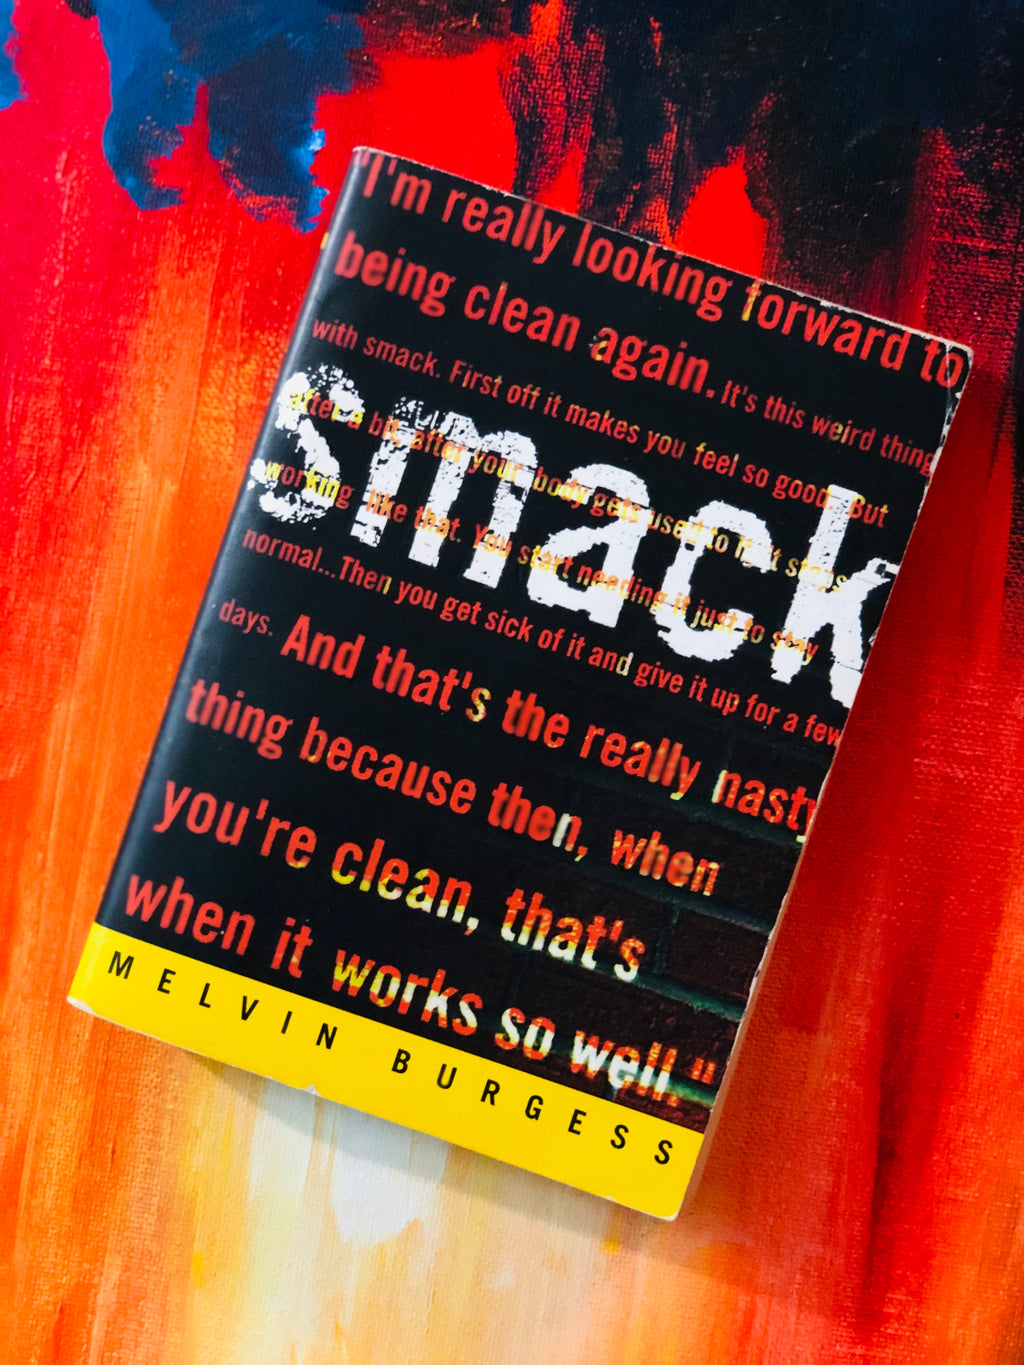 Smack- By Melvin Burgess